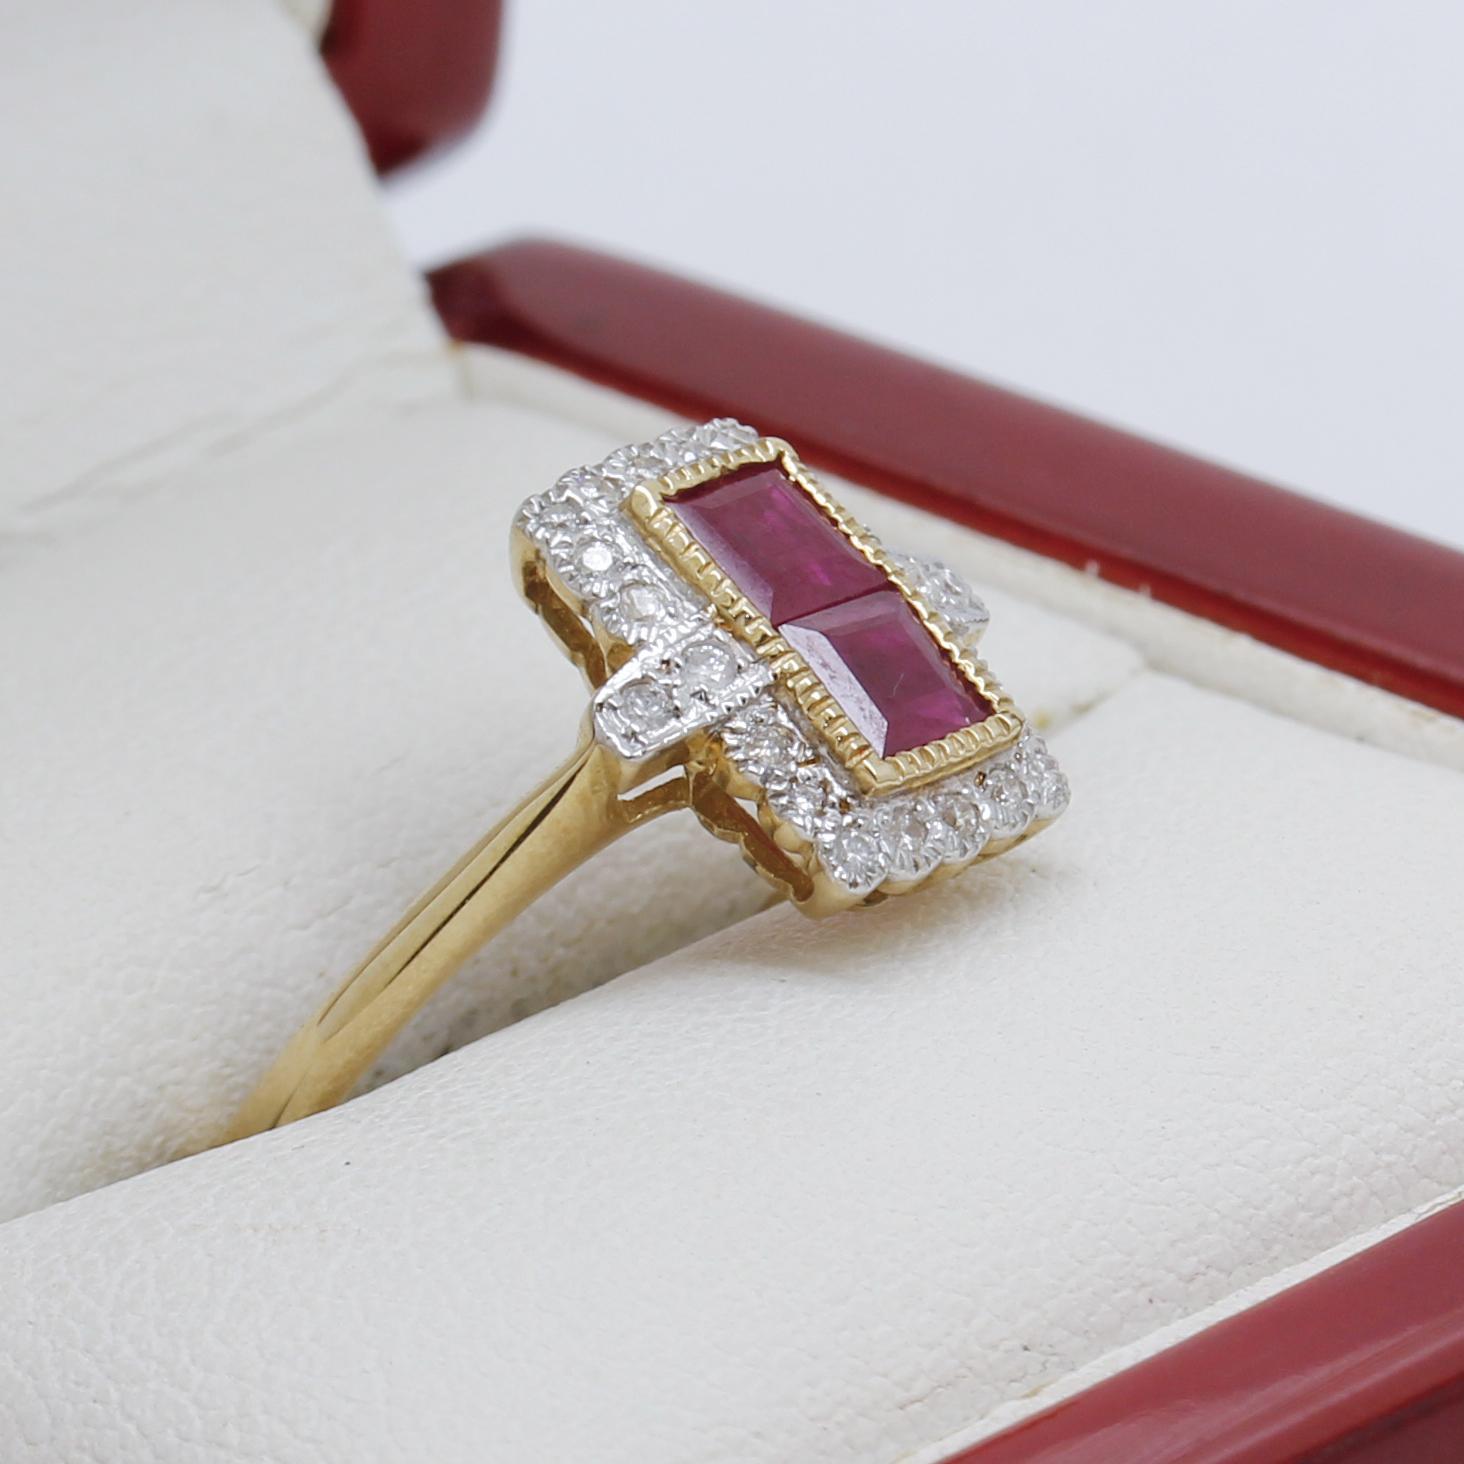 Women's Art Deco Style Ruby & Diamond Ring, New For Sale